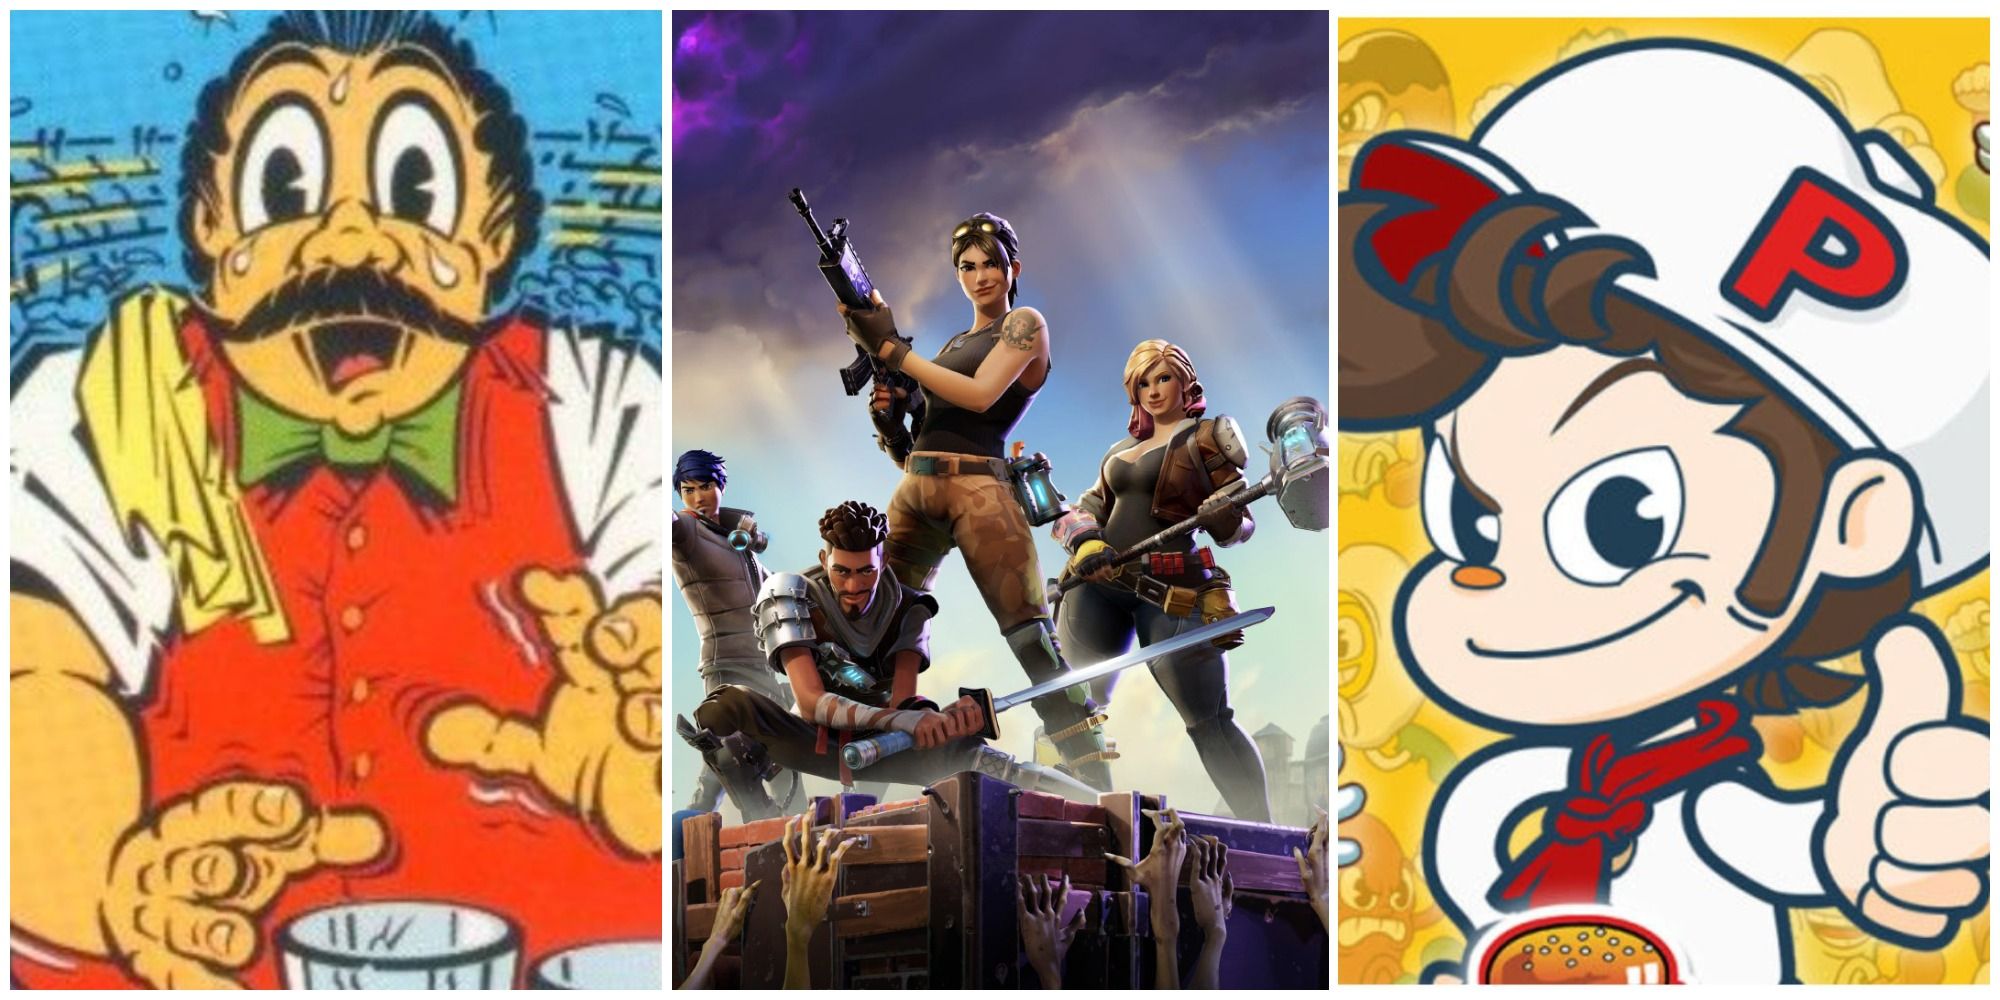 10 Retro Arcade Characters That Should Be Added To Fortnite